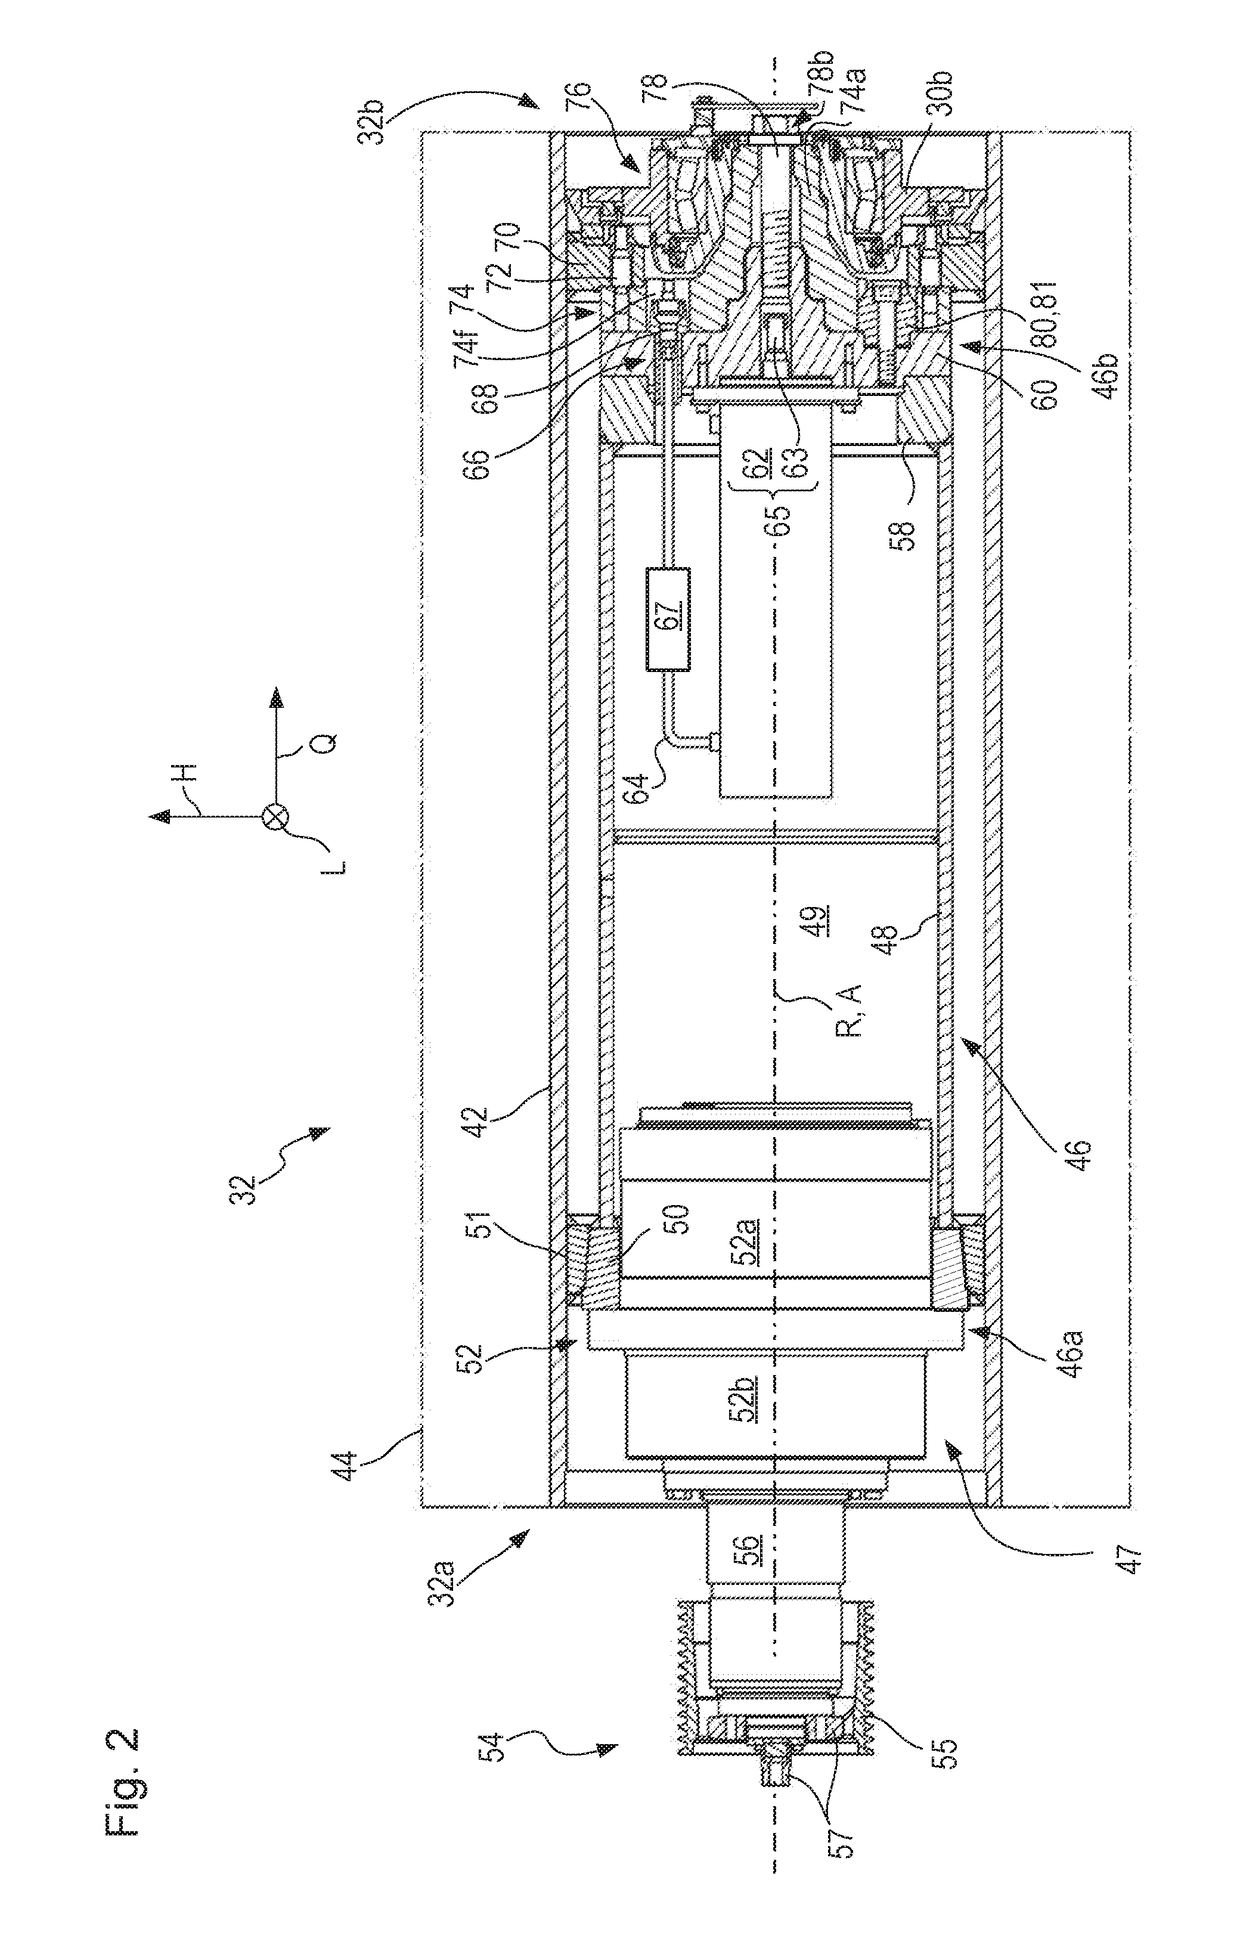 Earth working machine whose rotatable working apparatus, for installation on the machine, is conveyable into its operating position using an onboard actuator